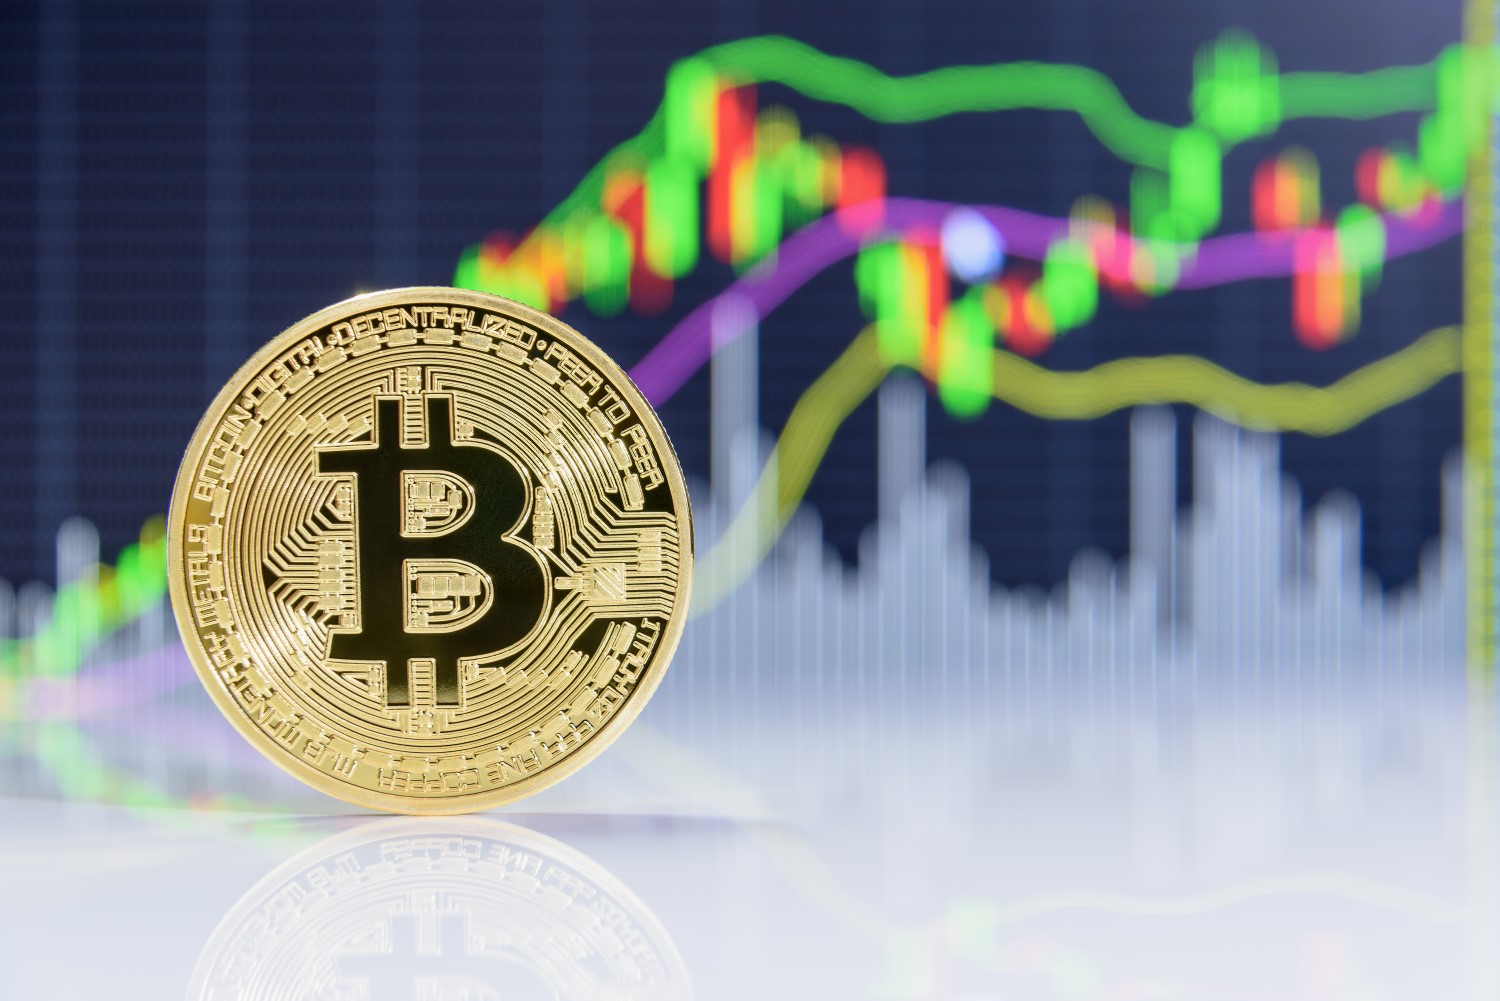 Bitcoin Price Looks Poised To Retest Highs Above $13K